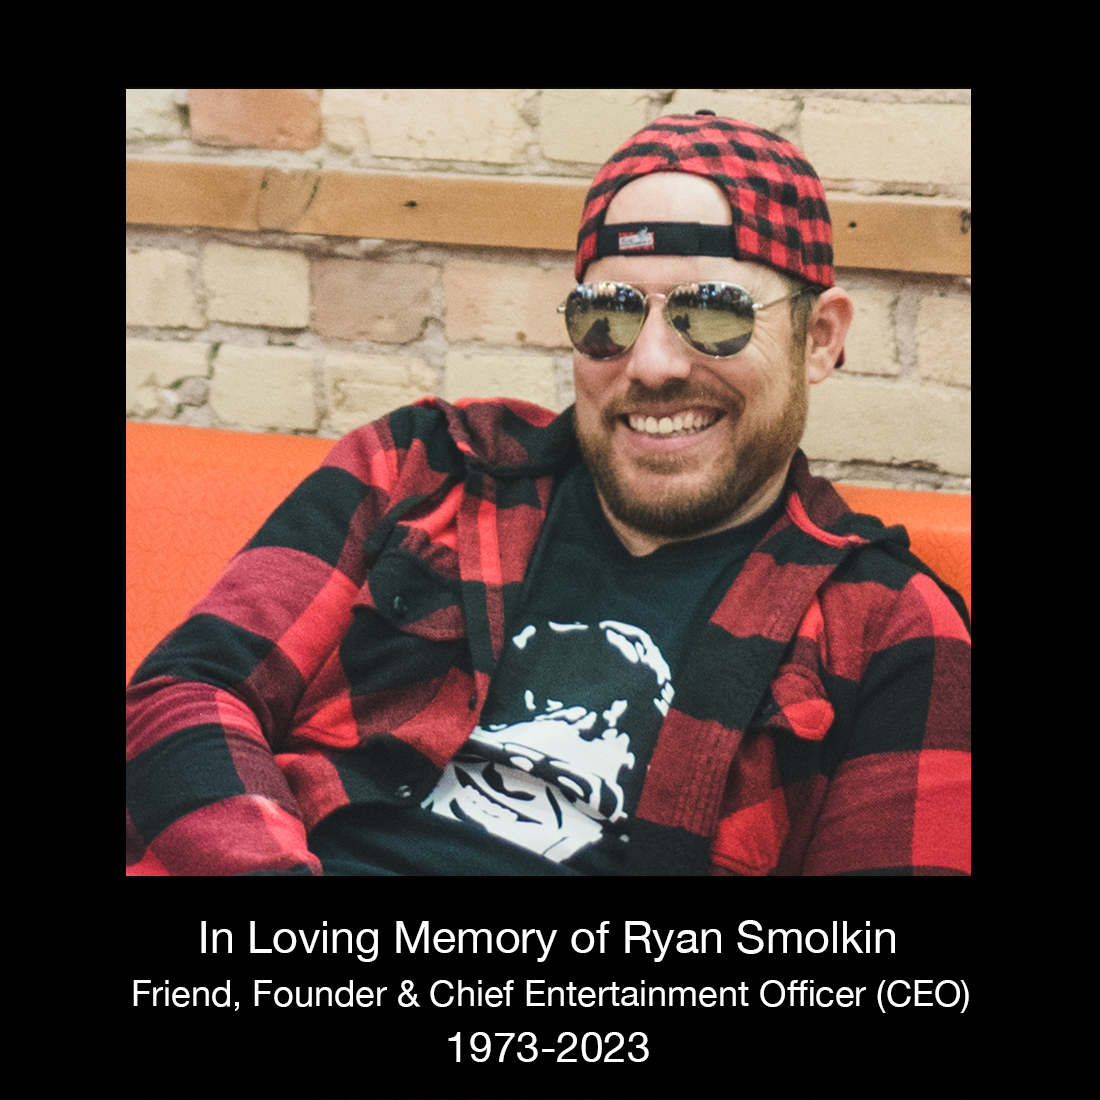 In Loving Memory of Ryan Smolkin Friend, Founder & Chief Entertainment Officer 1973 - 2023